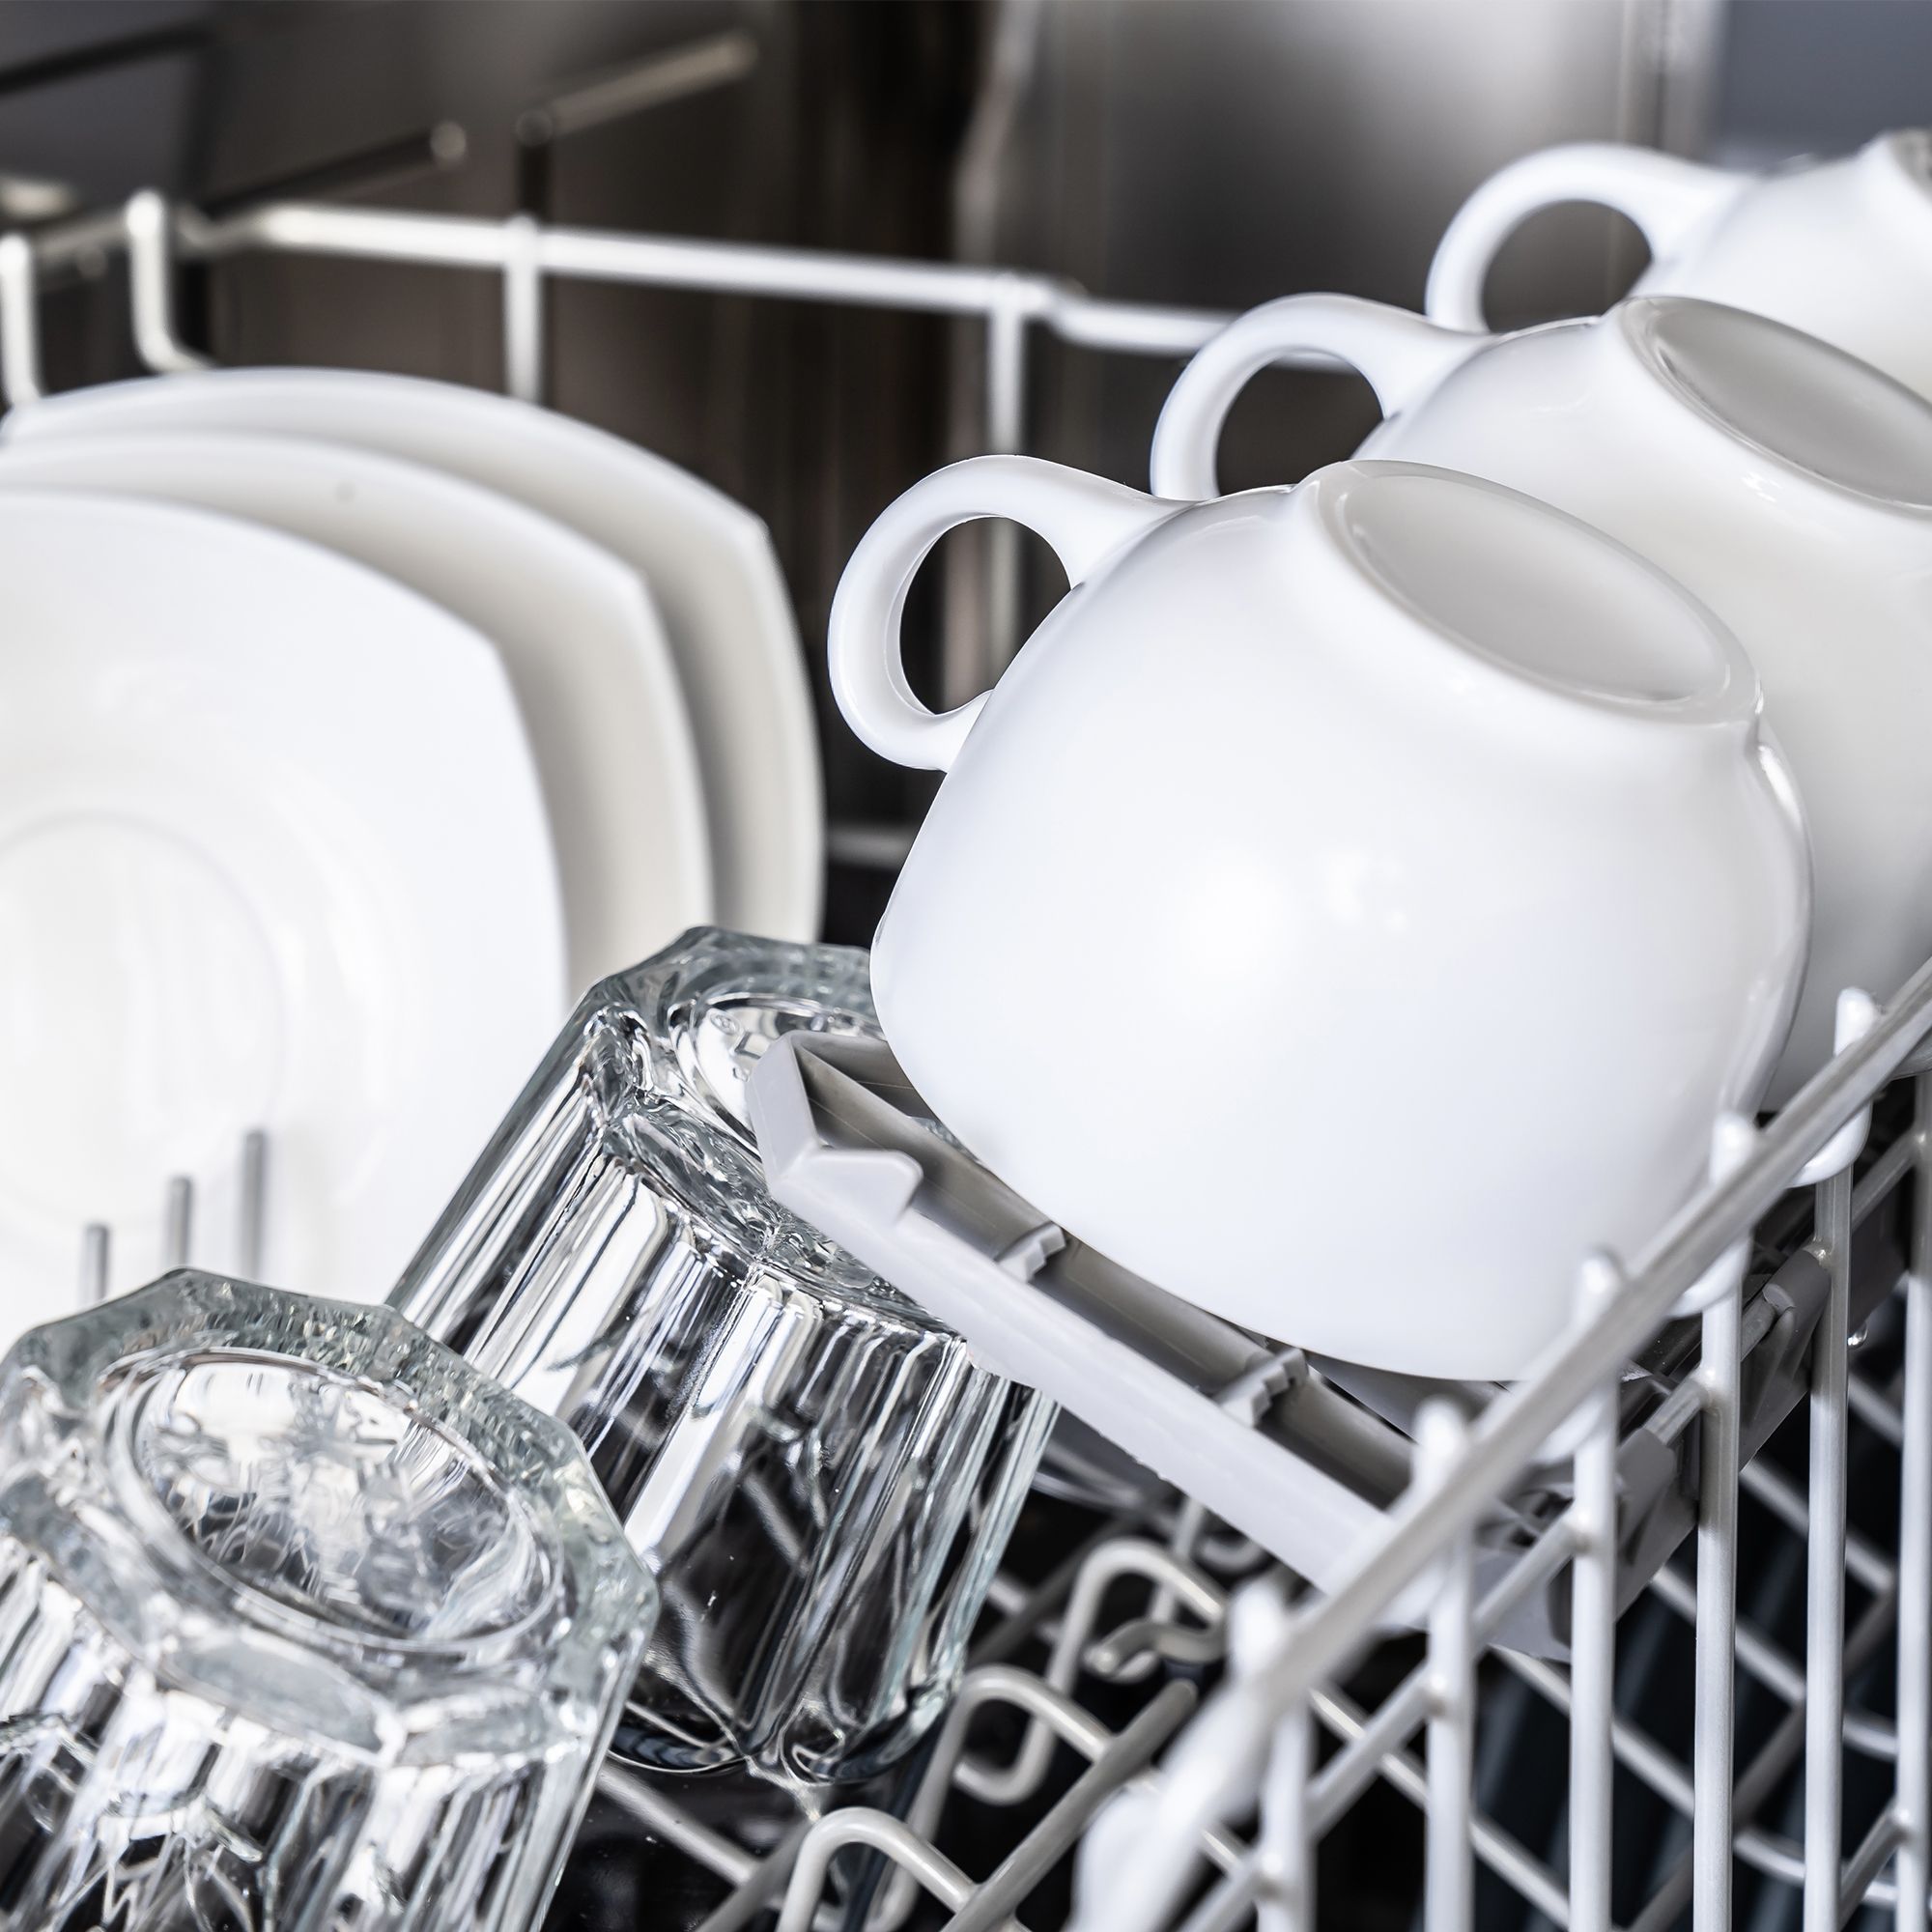 Every Part, Piece, and Function of a Dishwasher You Should Know About